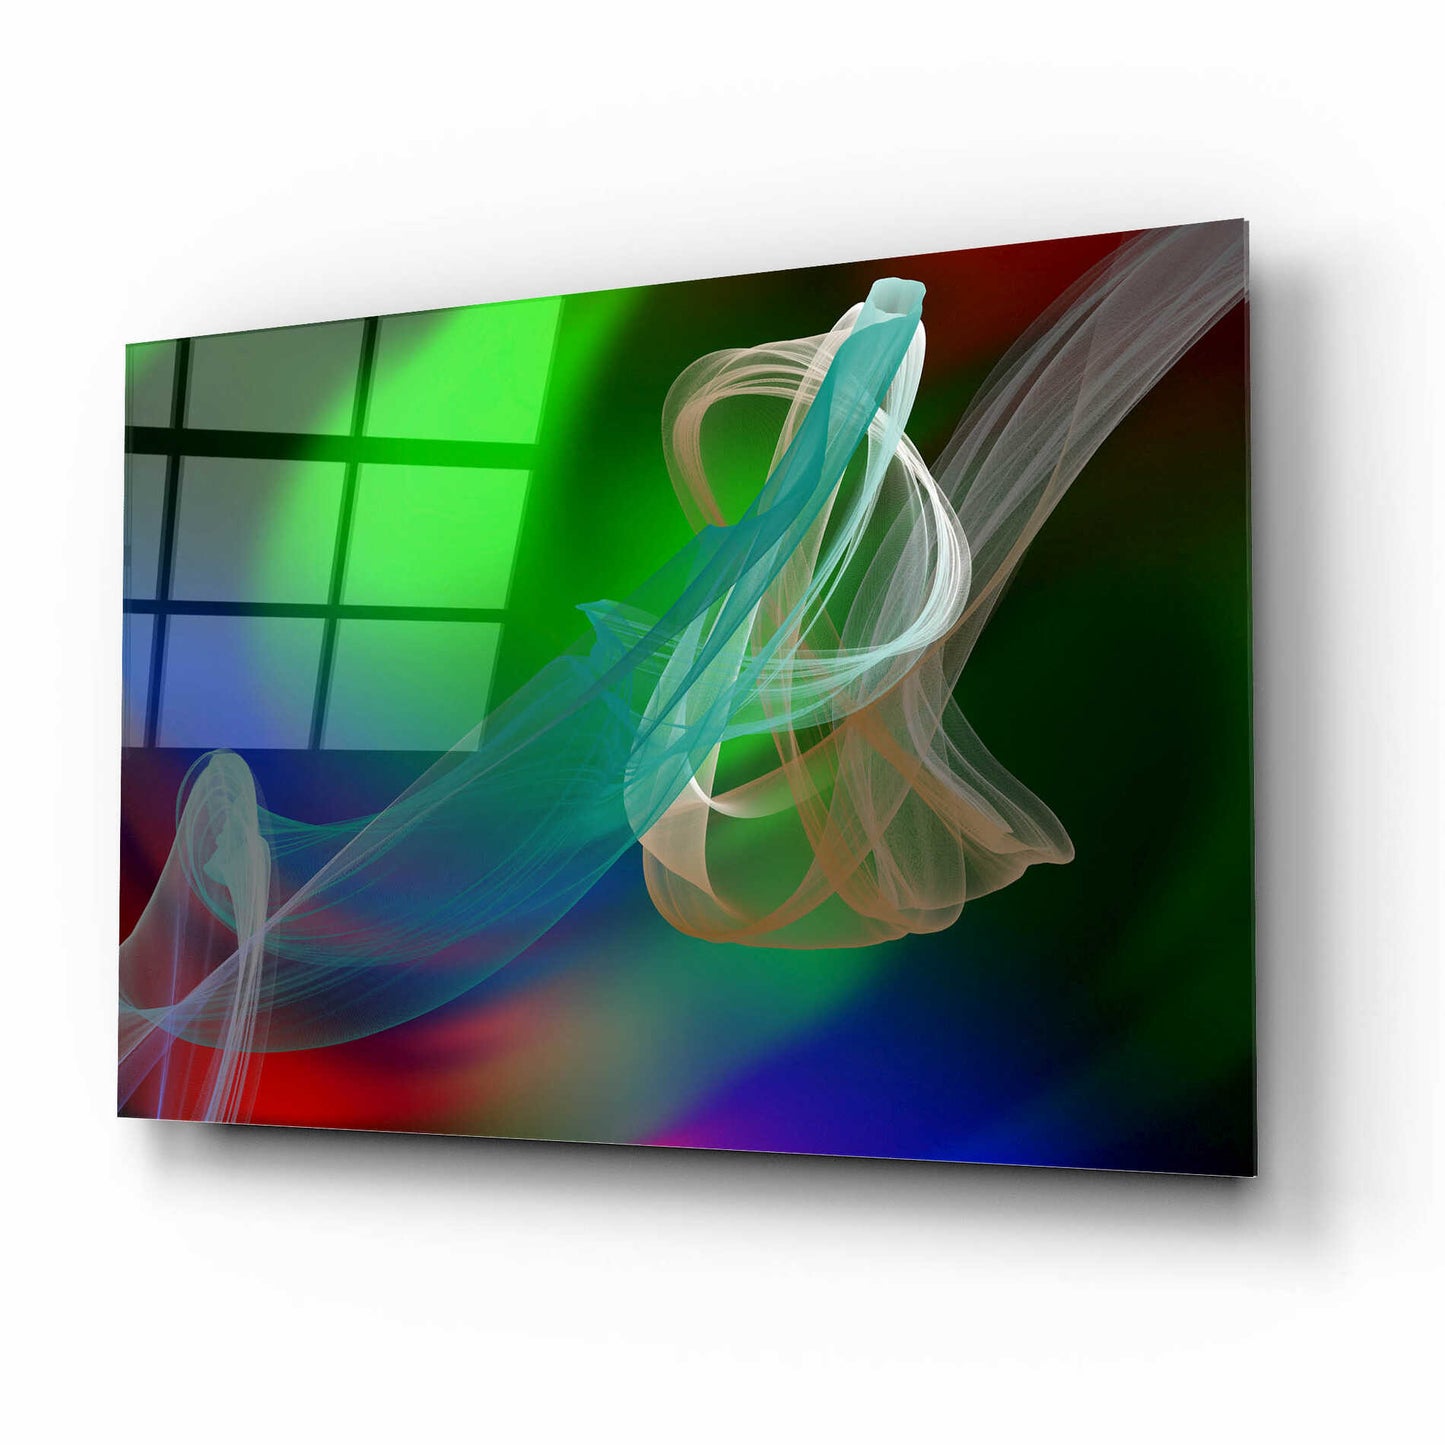 Epic Art 'Inverted Color In The Lines 1' by Irena Orlov Acrylic Glass Wall Art,16x12